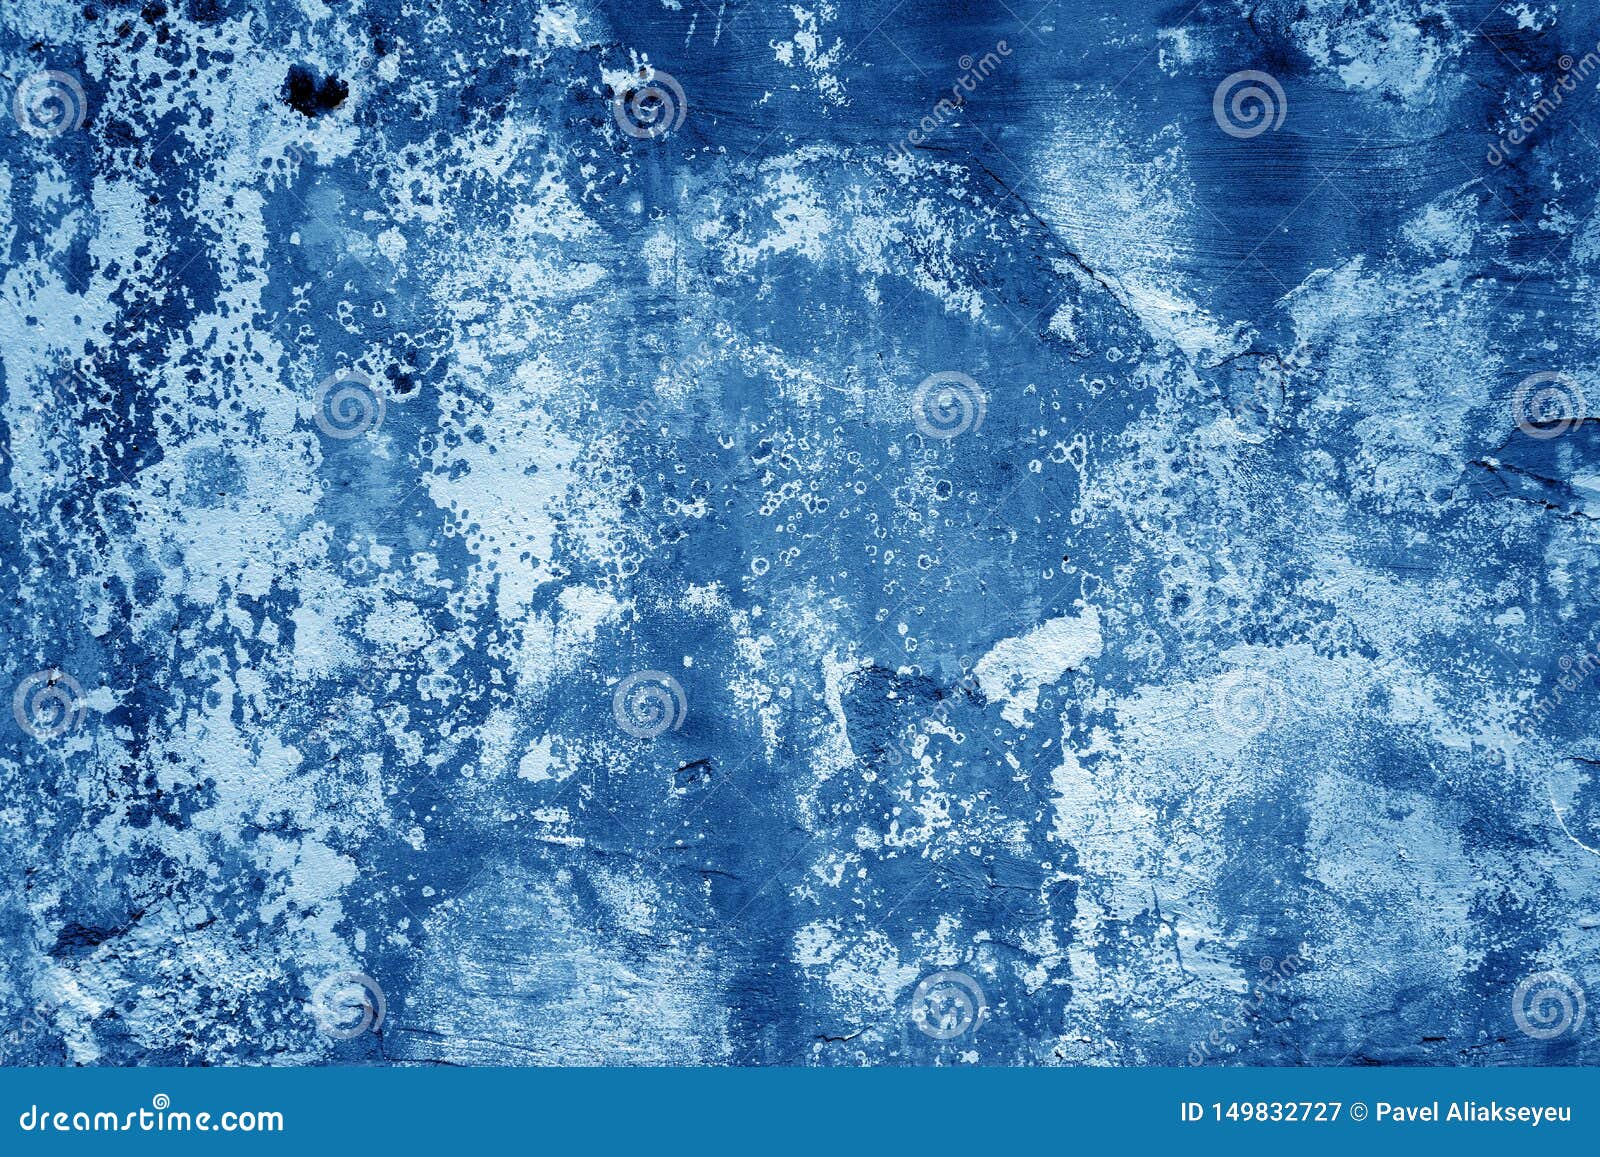 Grungy Cement Wall Texture in Navy Blue Tone Stock Image - Image of aged,  pattern: 149832727